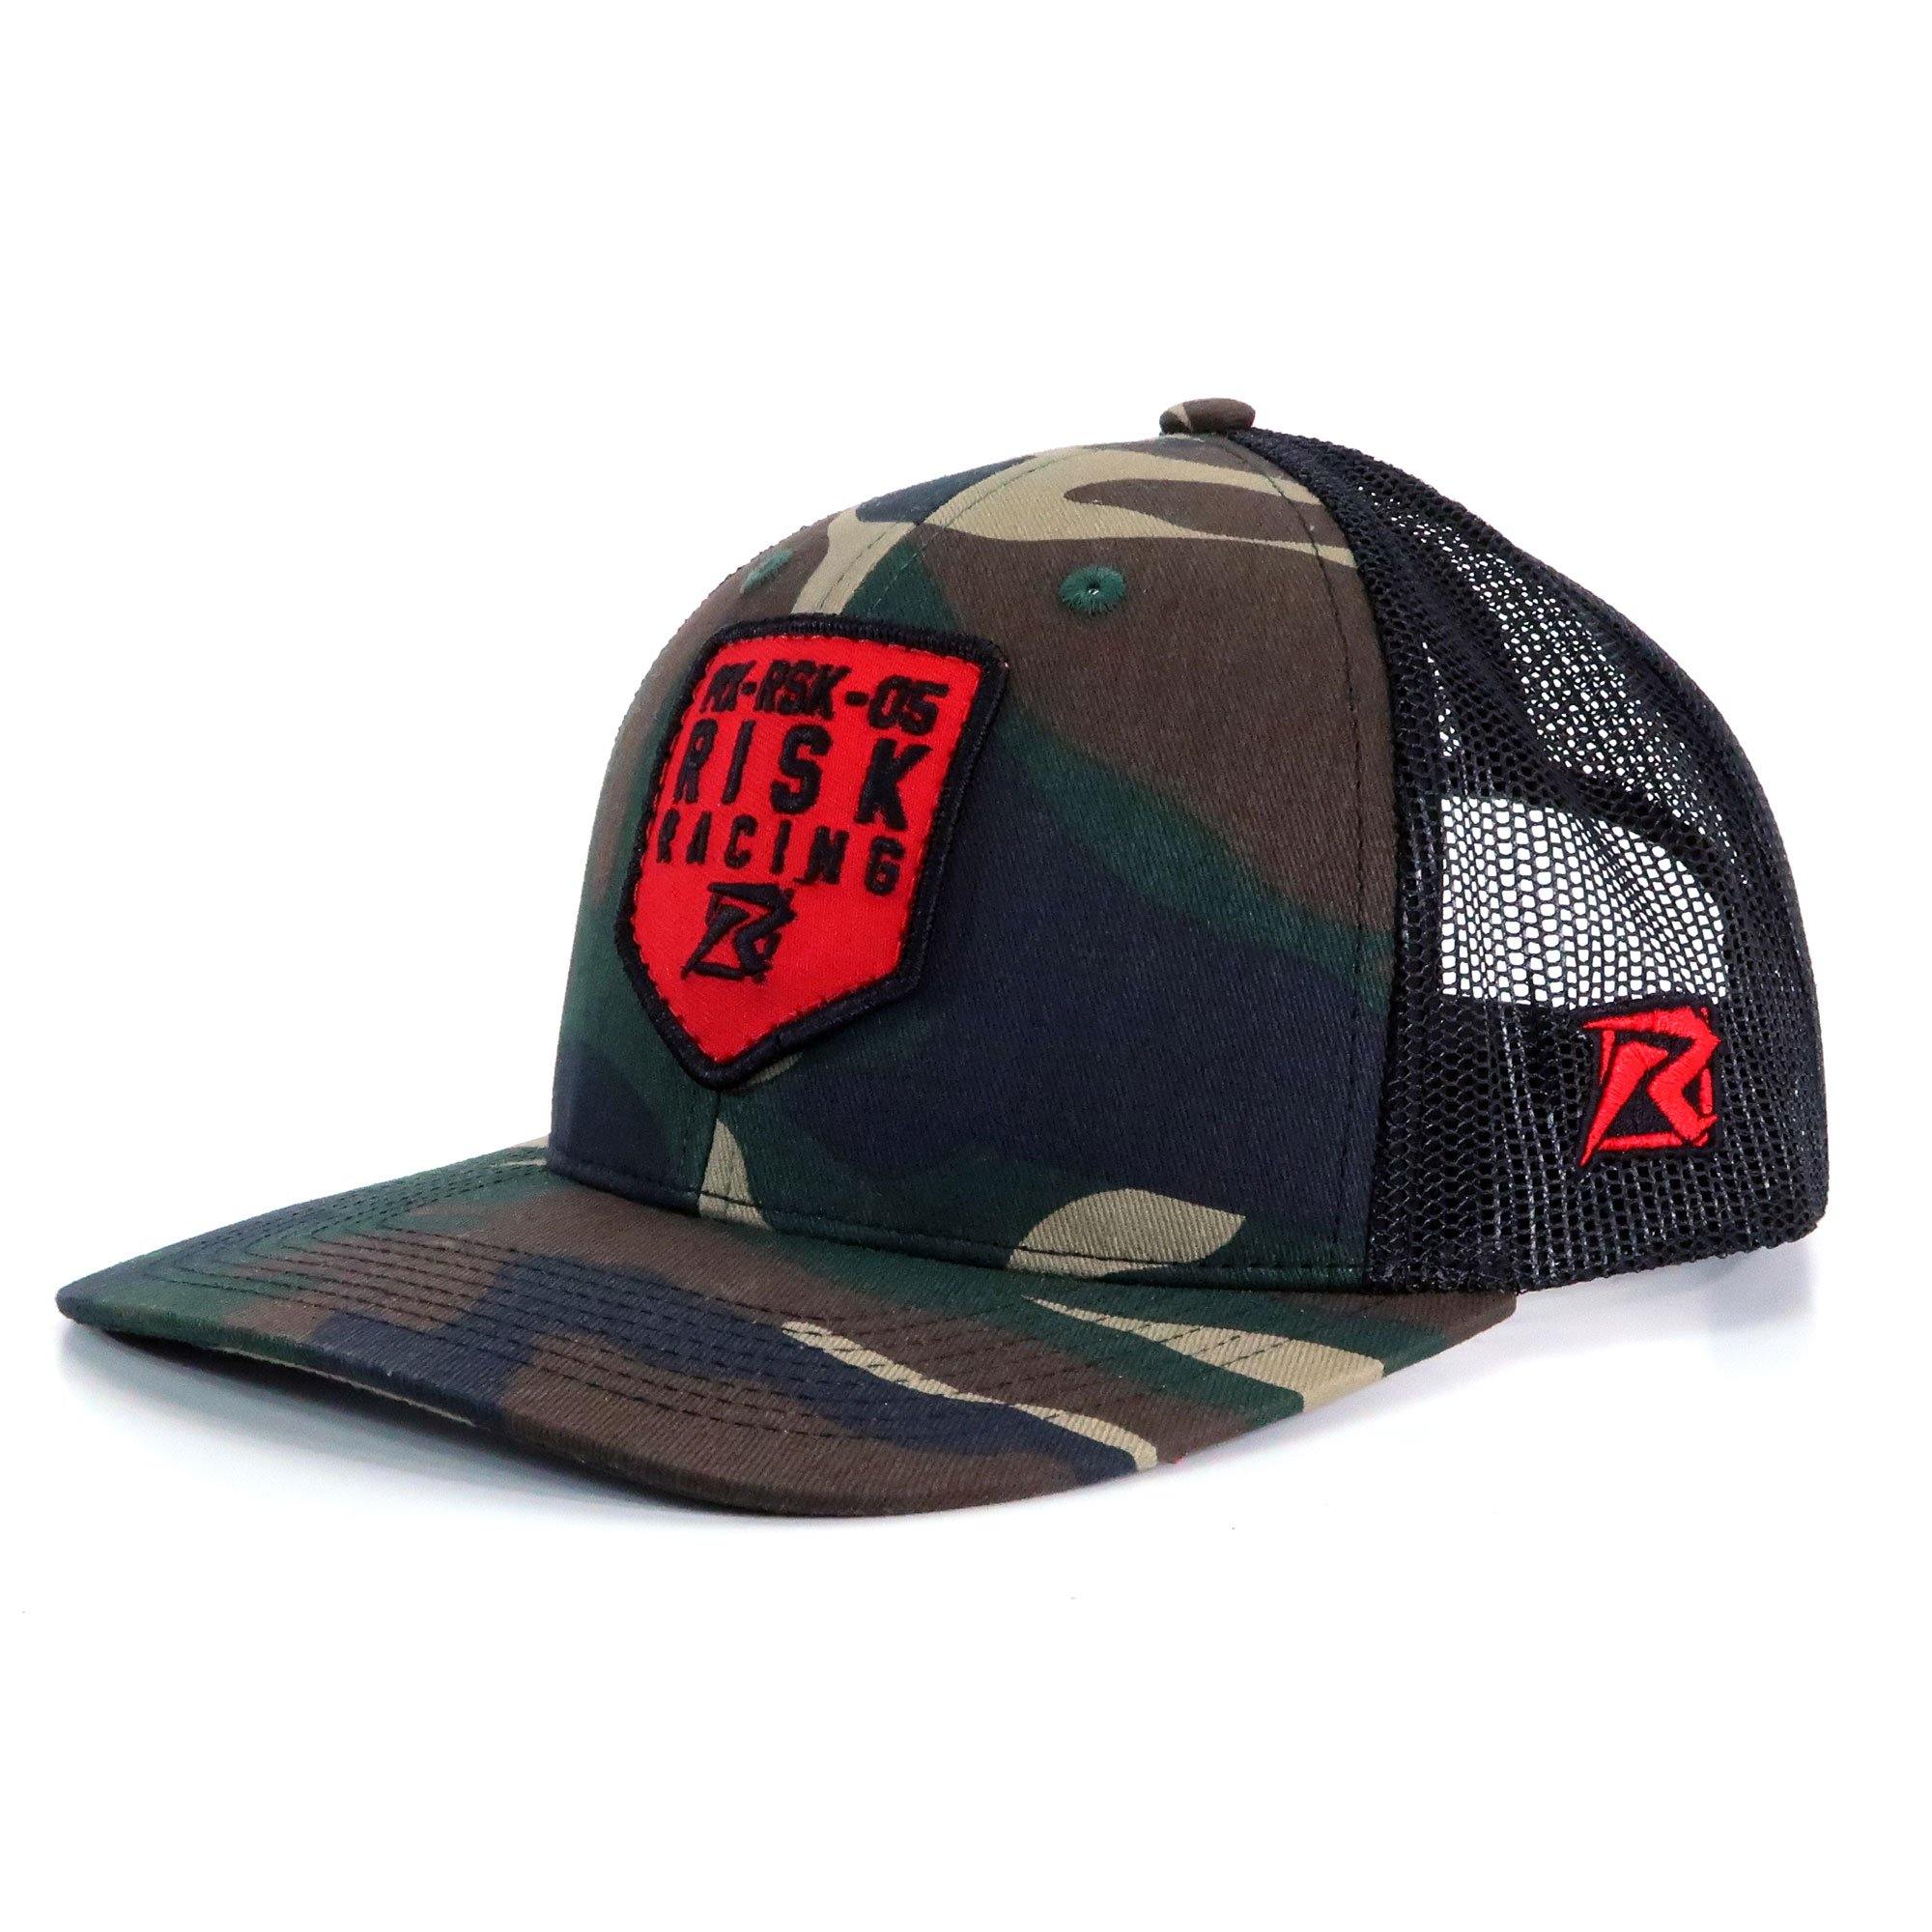 Risk Camo Red Patch Snapback Trucker Hat - Risk Racing